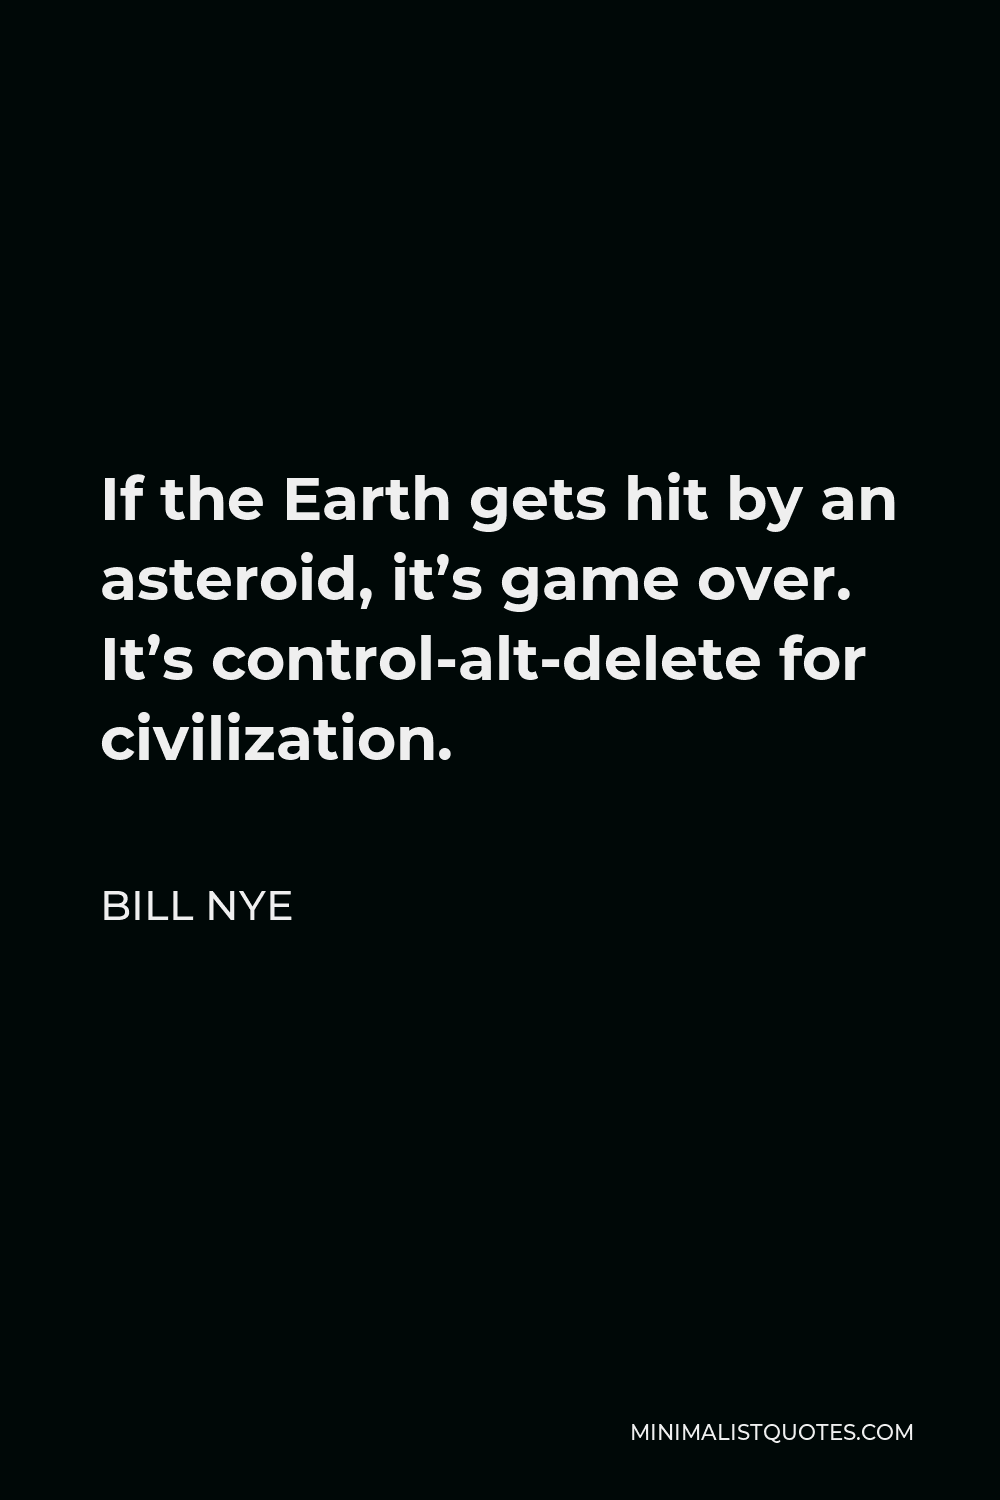 Bill Nye Quote - If the Earth gets hit by an asteroid, it’s game over. It’s control-alt-delete for civilization.